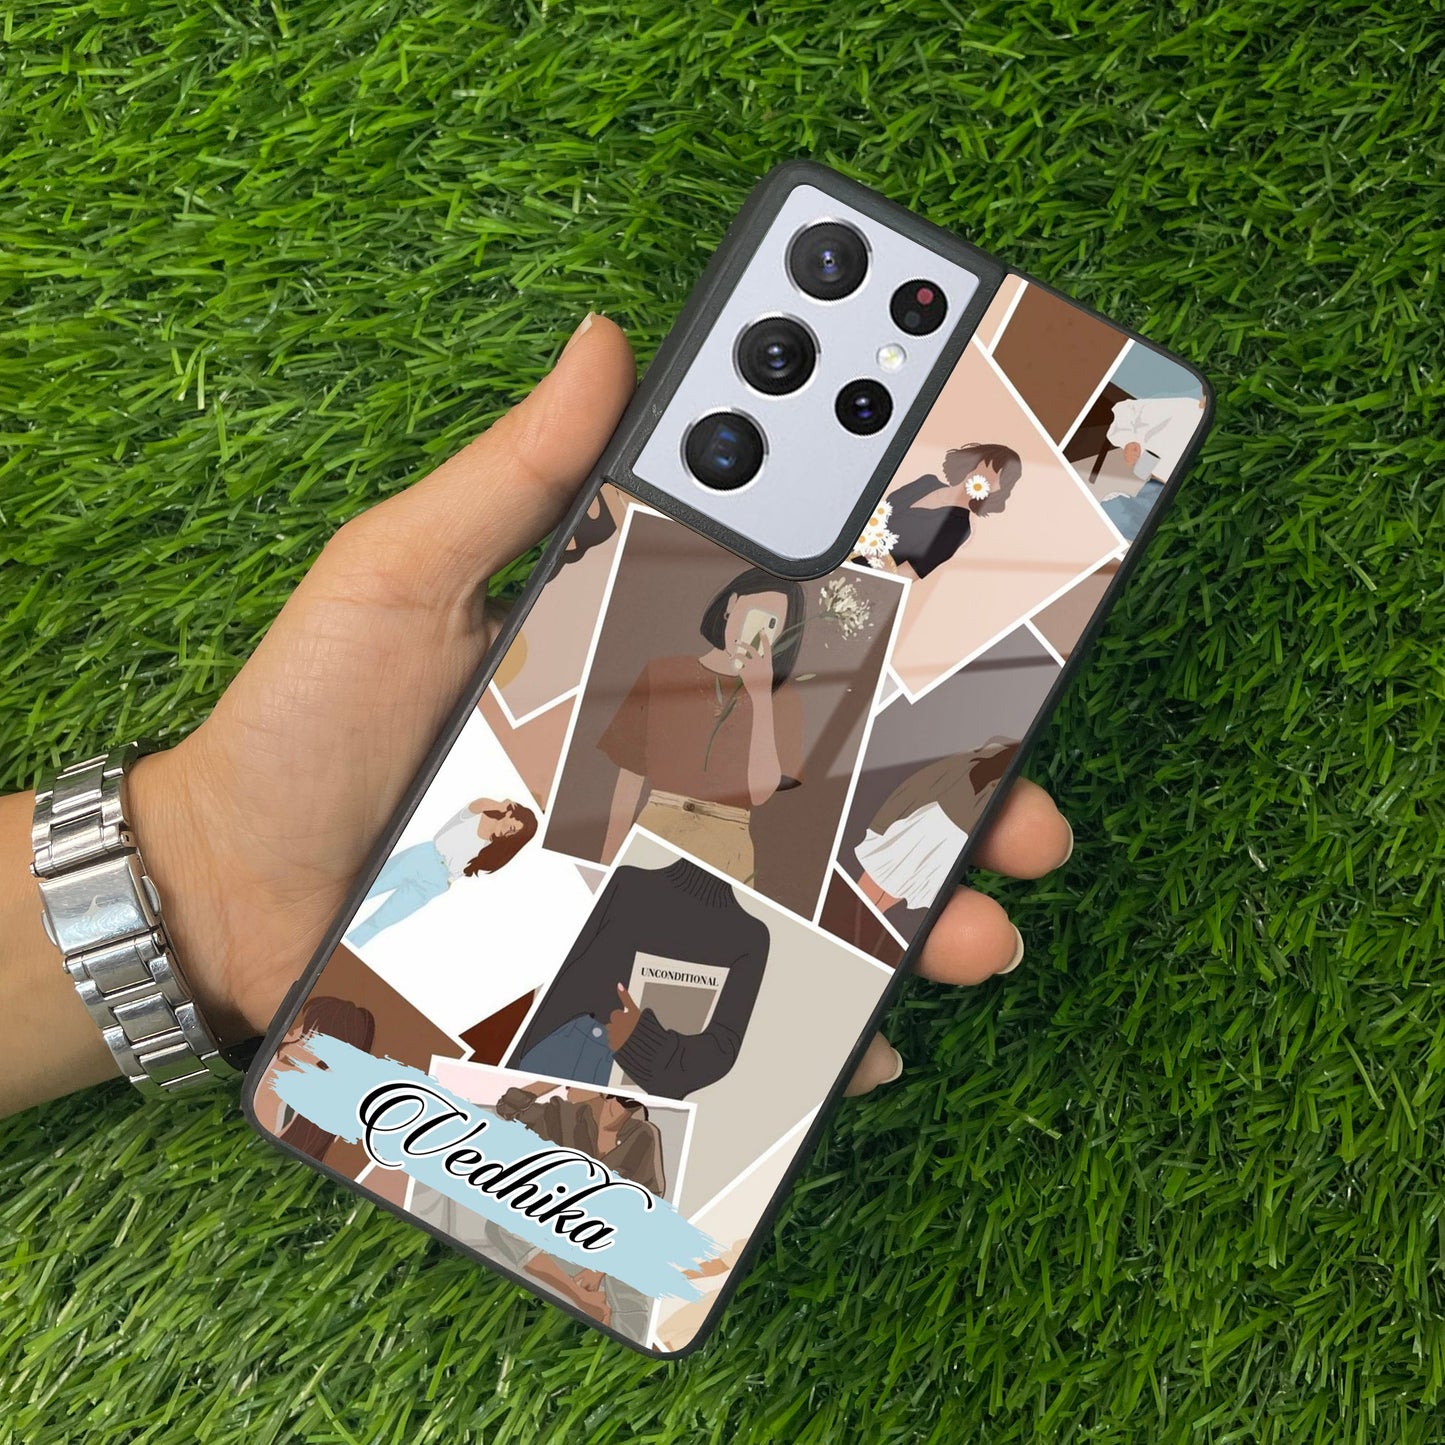 Selfie Girl Collage Glass Case Cover For Samsung